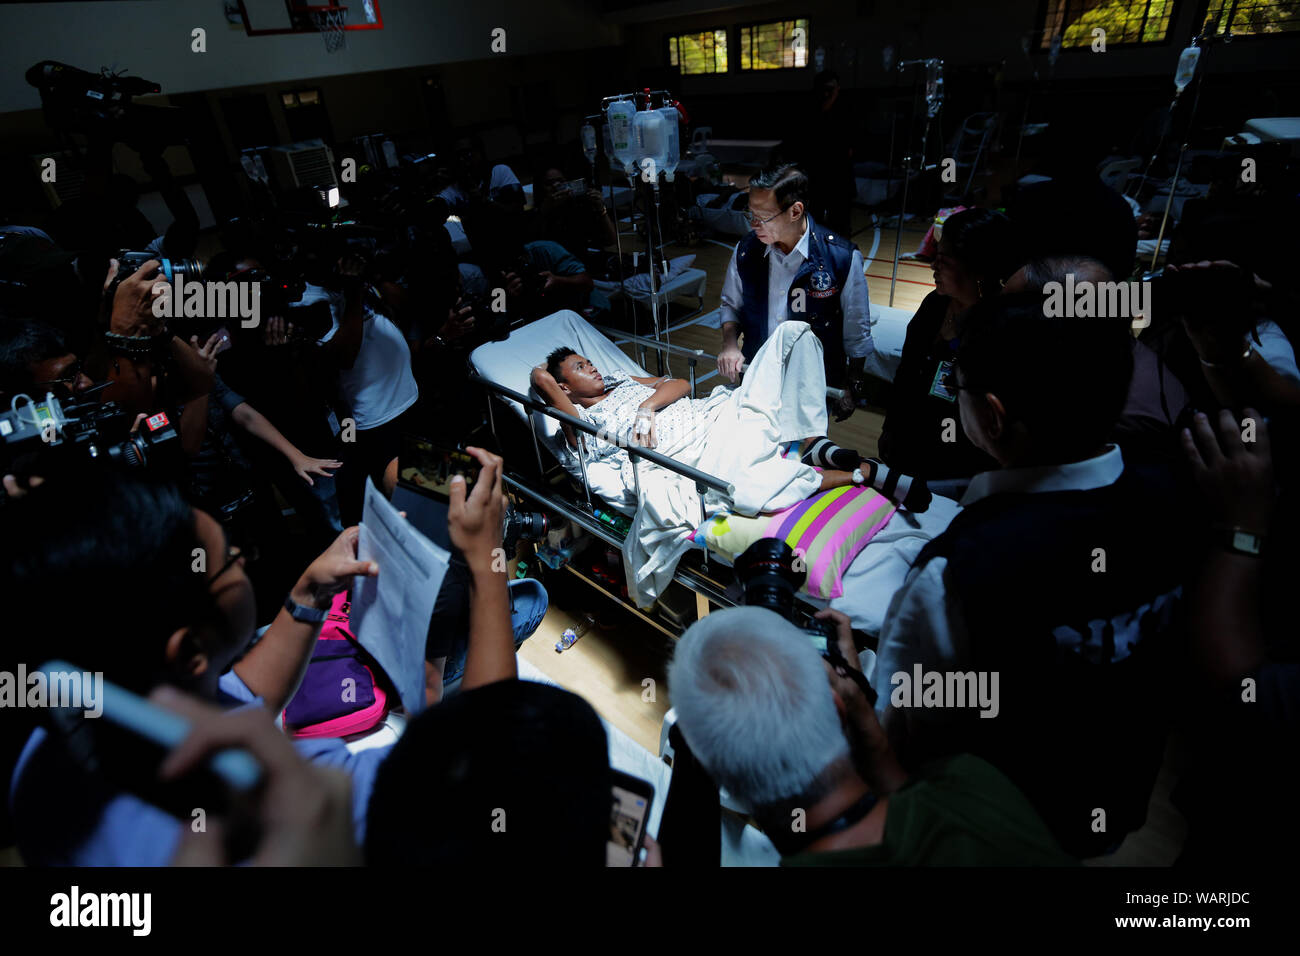 Beijing, Philippines. 20th Aug, 2019. Philippine Department of Health Secretary Francisco Duque III (C, standing) talks to a leptospirosis patient in a leptospirosis ward transformed from a covered basketball court in the National Kidney and Transplant Institute (NKTI) in Quezon City, the Philippines, Aug. 20, 2019. Credit: Rouelle Umali/Xinhua/Alamy Live News Stock Photo